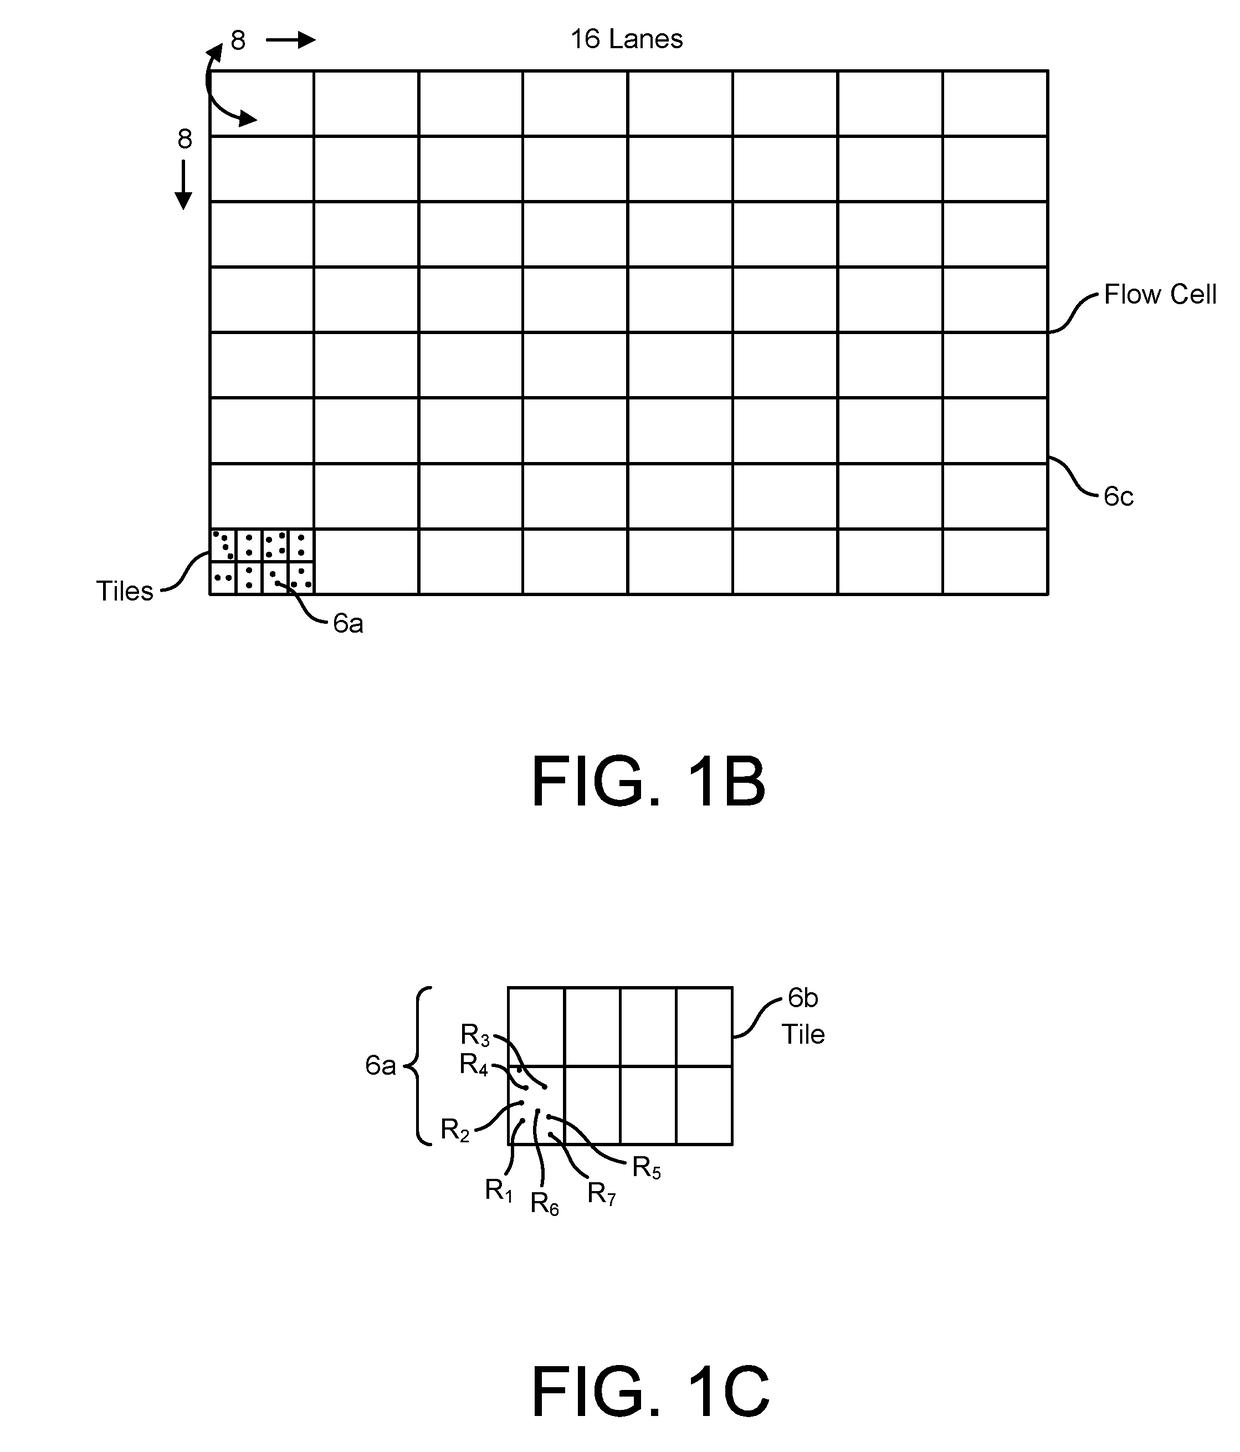 Bioinformatics systems, apparatuses, and methods for performing secondary and/or tertiary processing